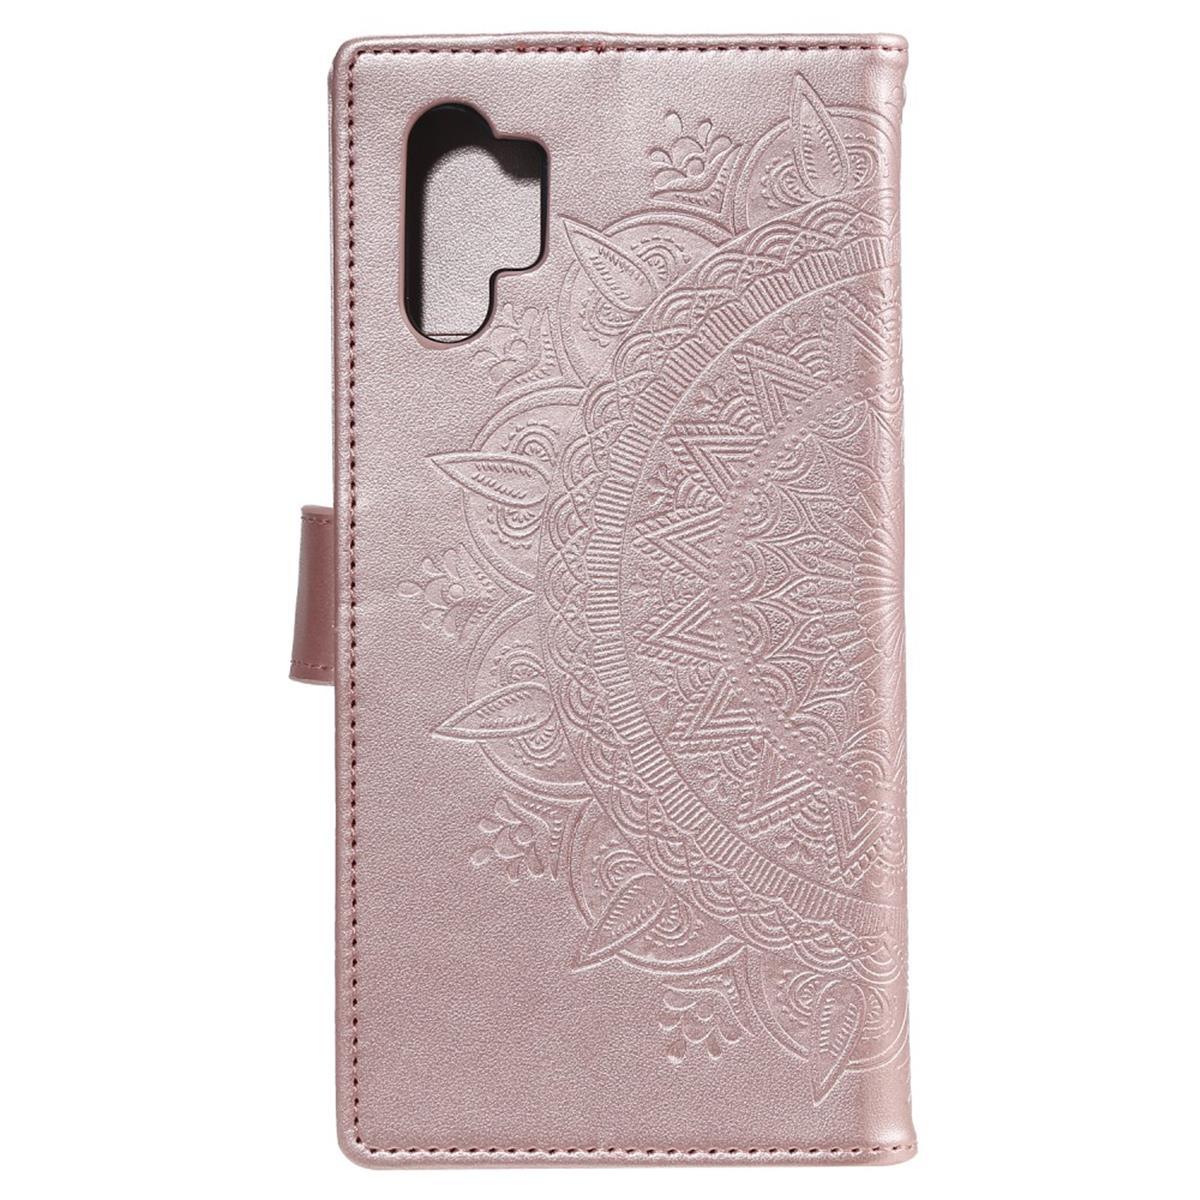 COVERKINGZ Klapphülle mit Mandala Muster, Bookcover, A32 4G, Roségold Samsung, Galaxy